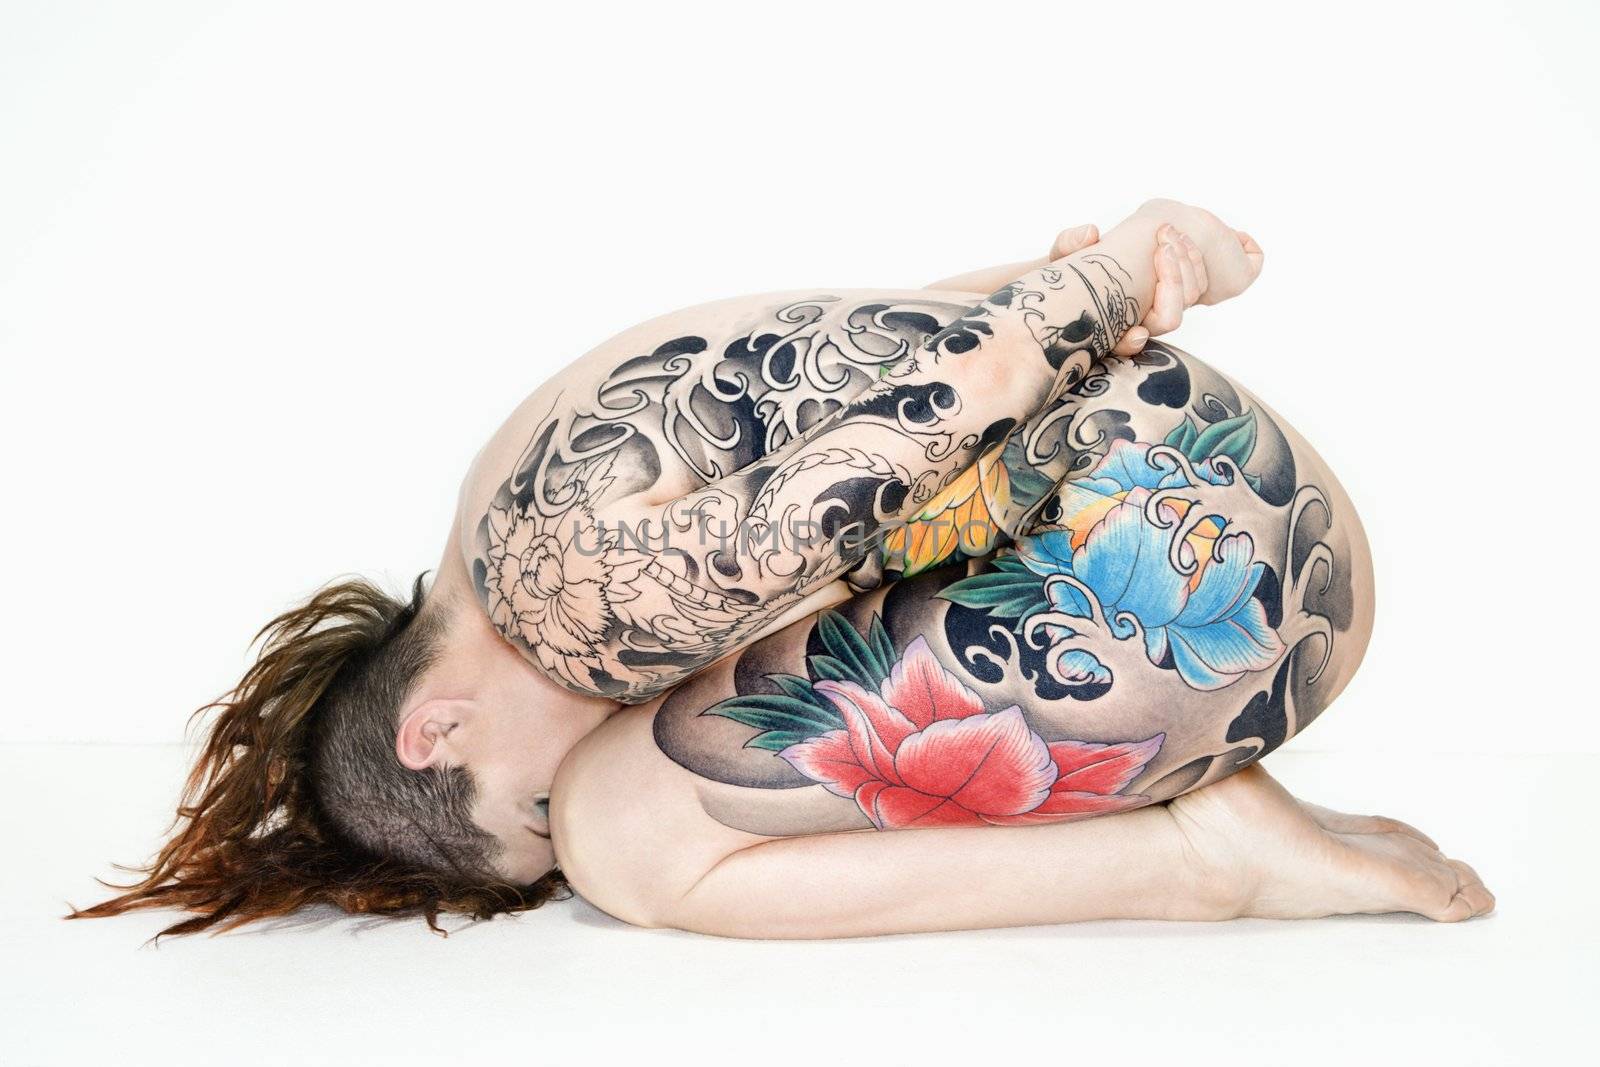 Nude caucasian woman with tattoos sitting on floor.